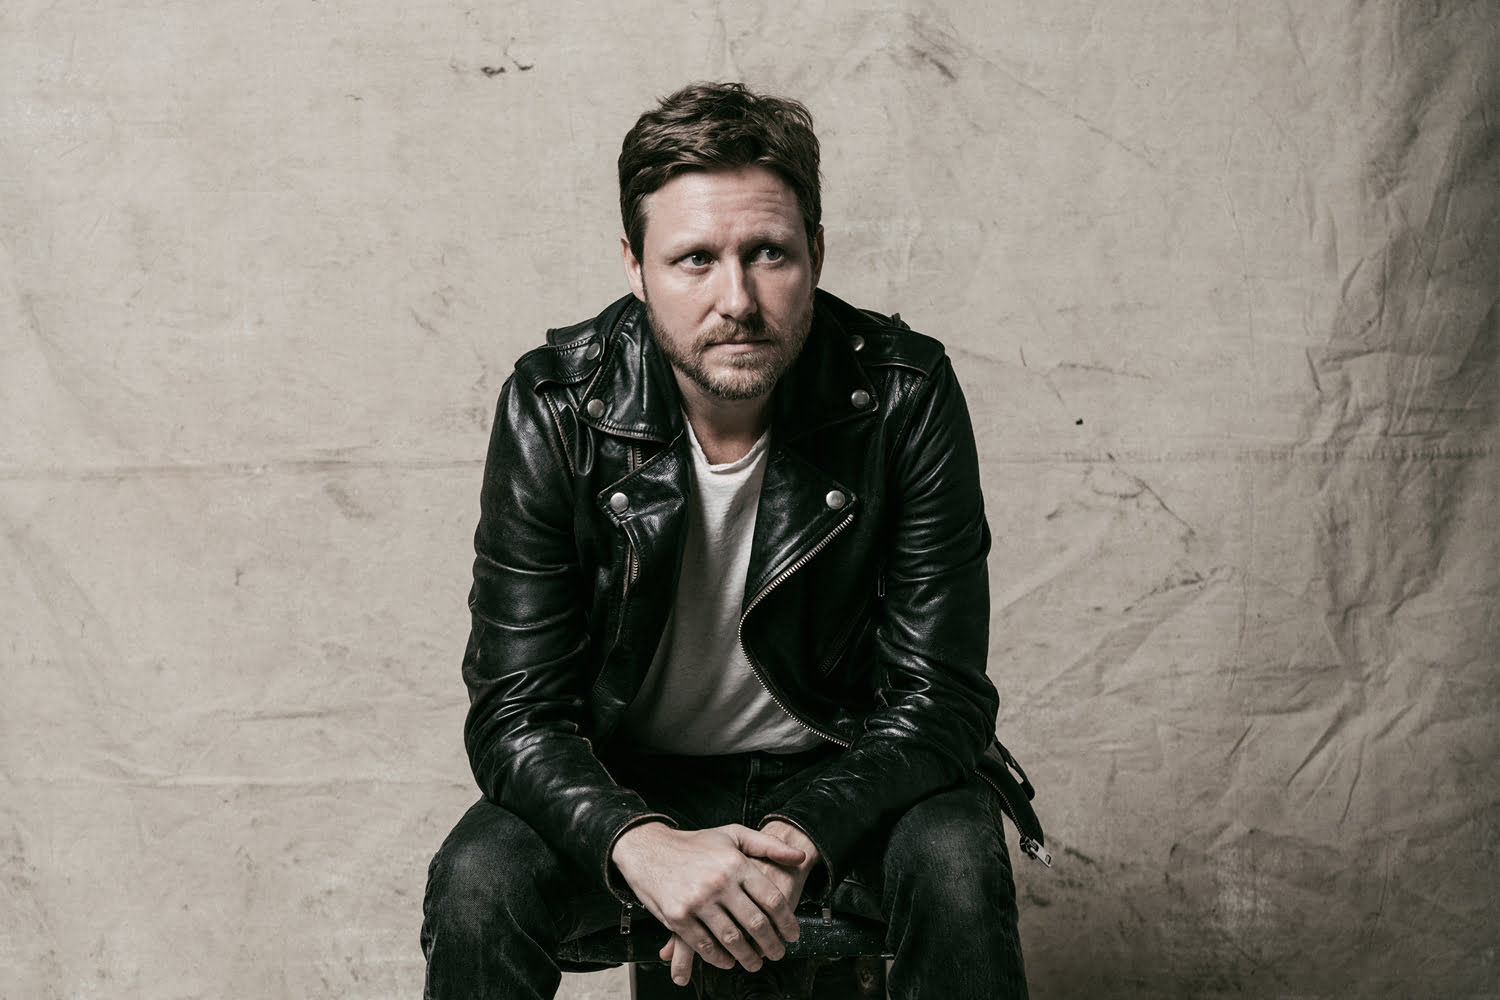 How I Got to Memphis: Cory Branan in Conversation with Coco Hames